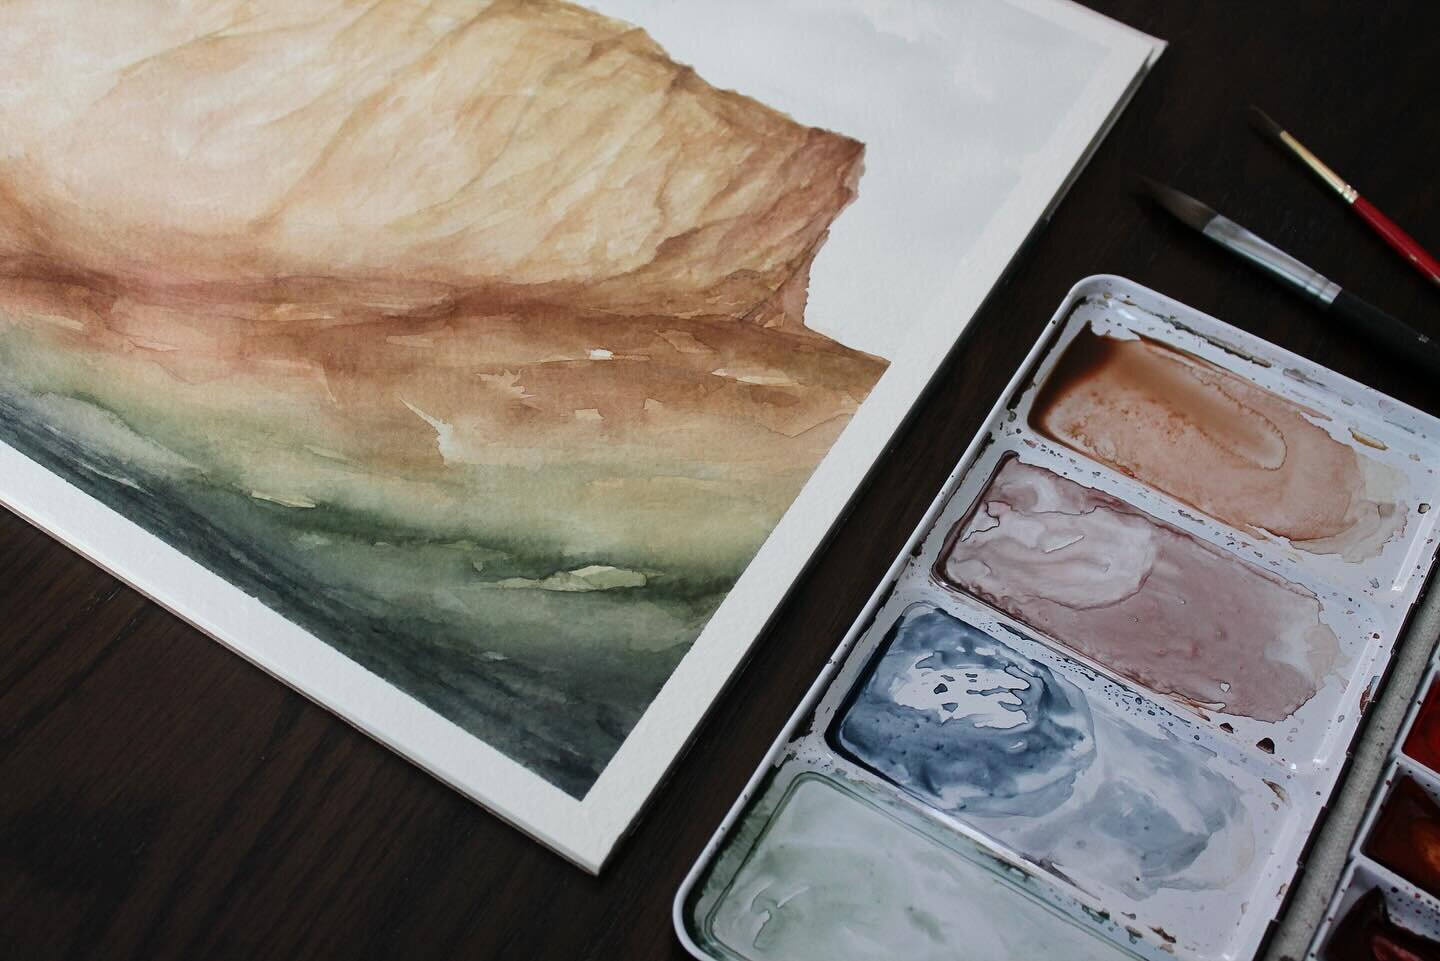 I vowed to play with more colors this year (my dark gray blue is almost out&hellip;) and focusing on desert rocks has really brought out some fun new palettes.

Swipe for my favorite watercolor texture 🎨

#watercolor #watercolors #watercolorart